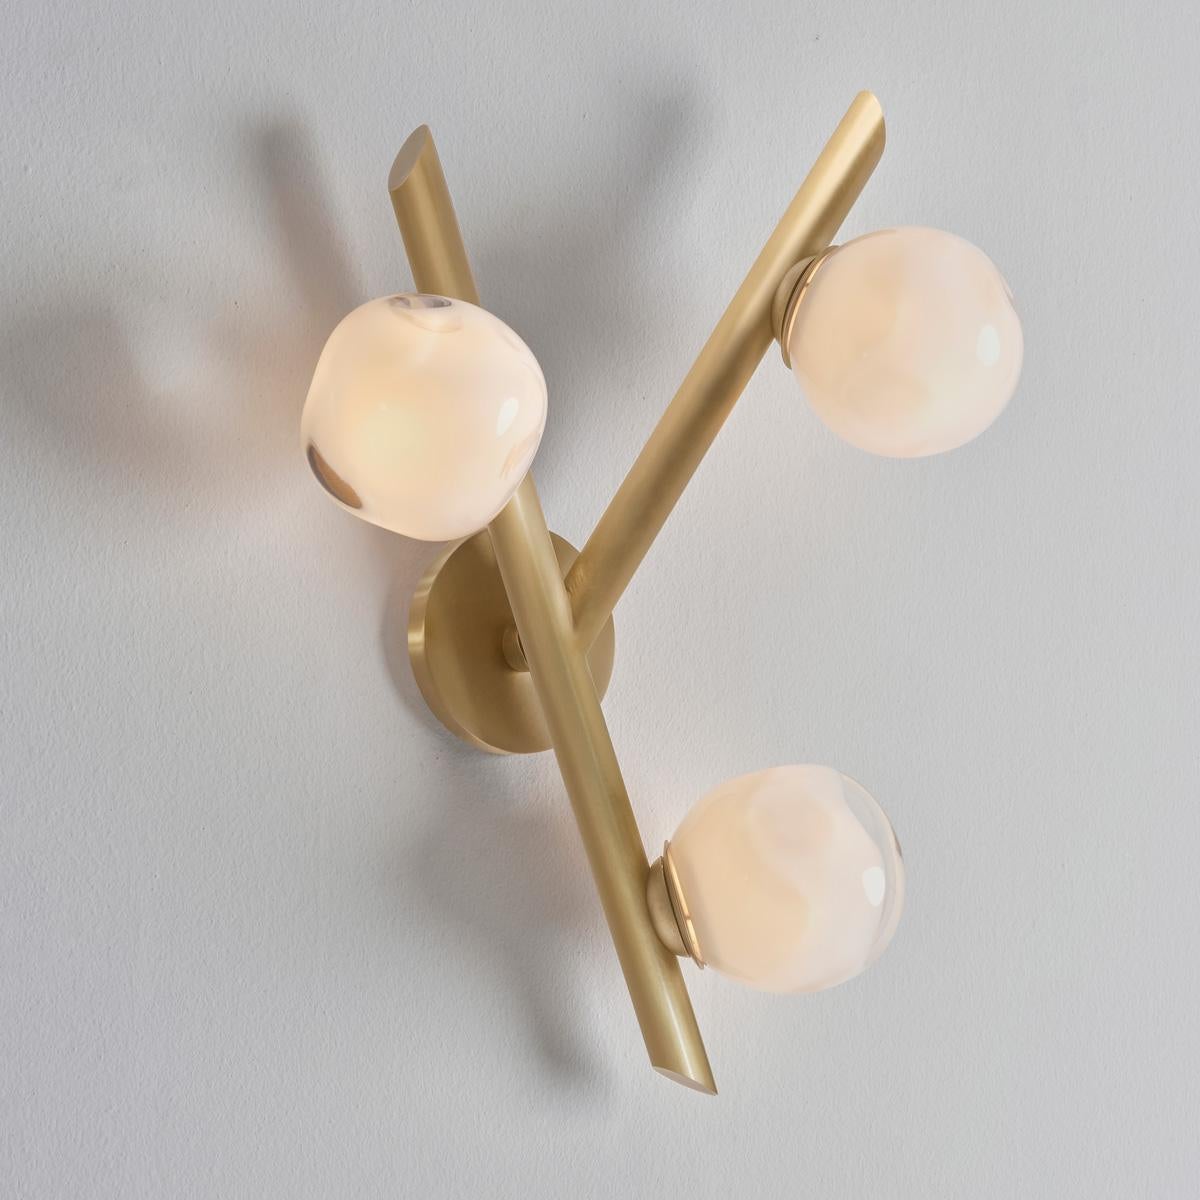 Modern Antares Wall Light by Gaspare Asaro- Satin Brass Finish For Sale